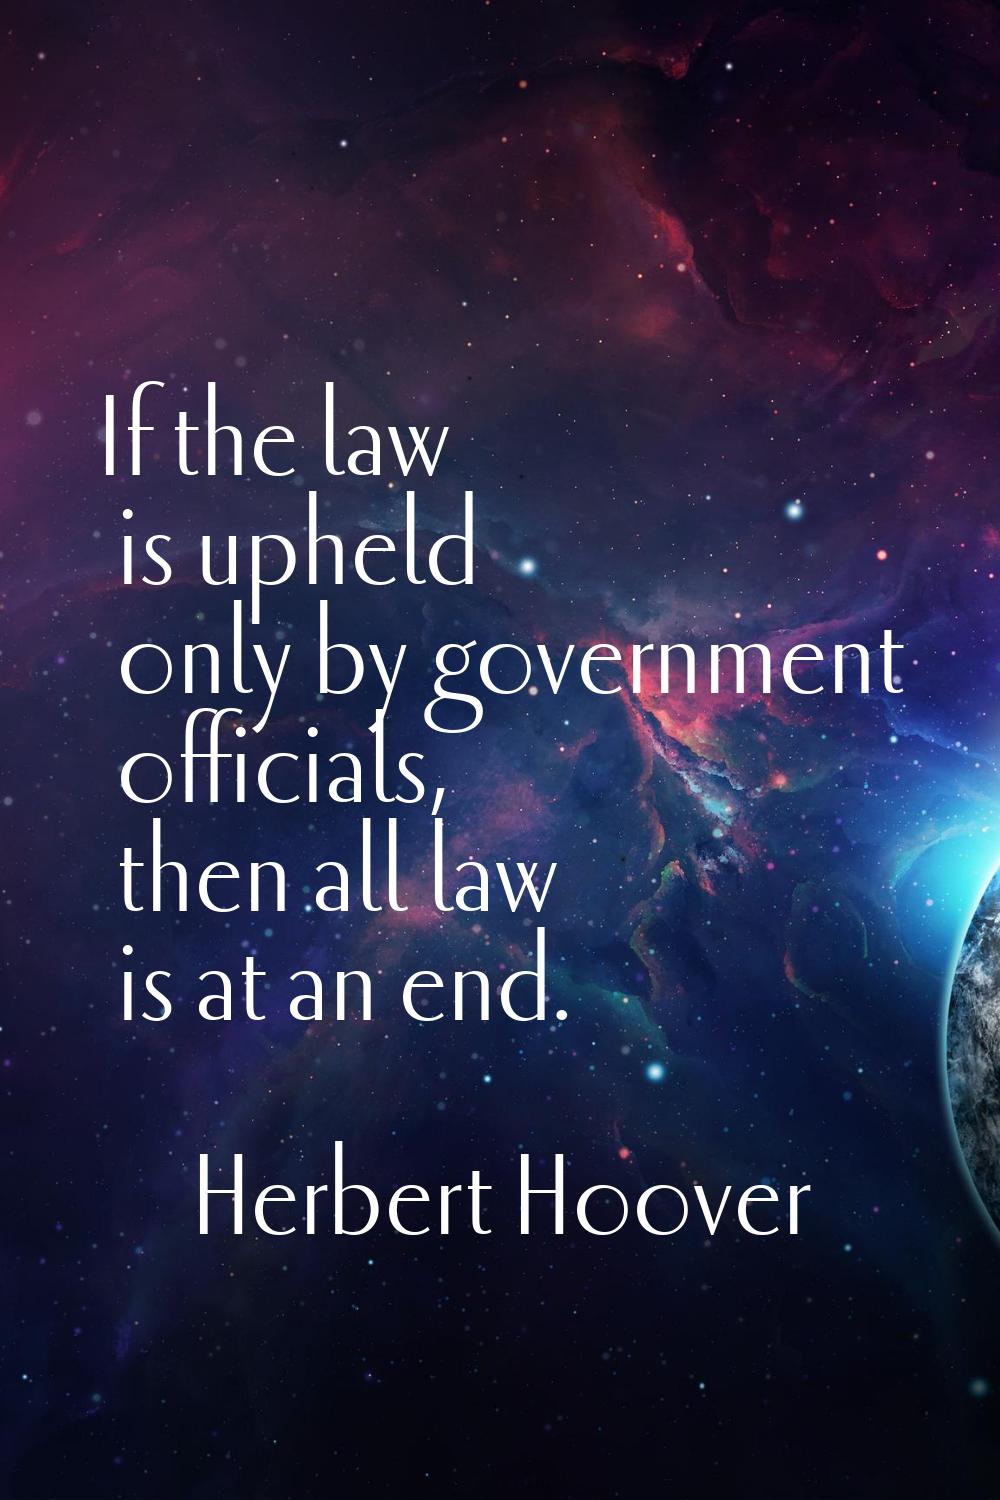 If the law is upheld only by government officials, then all law is at an end.